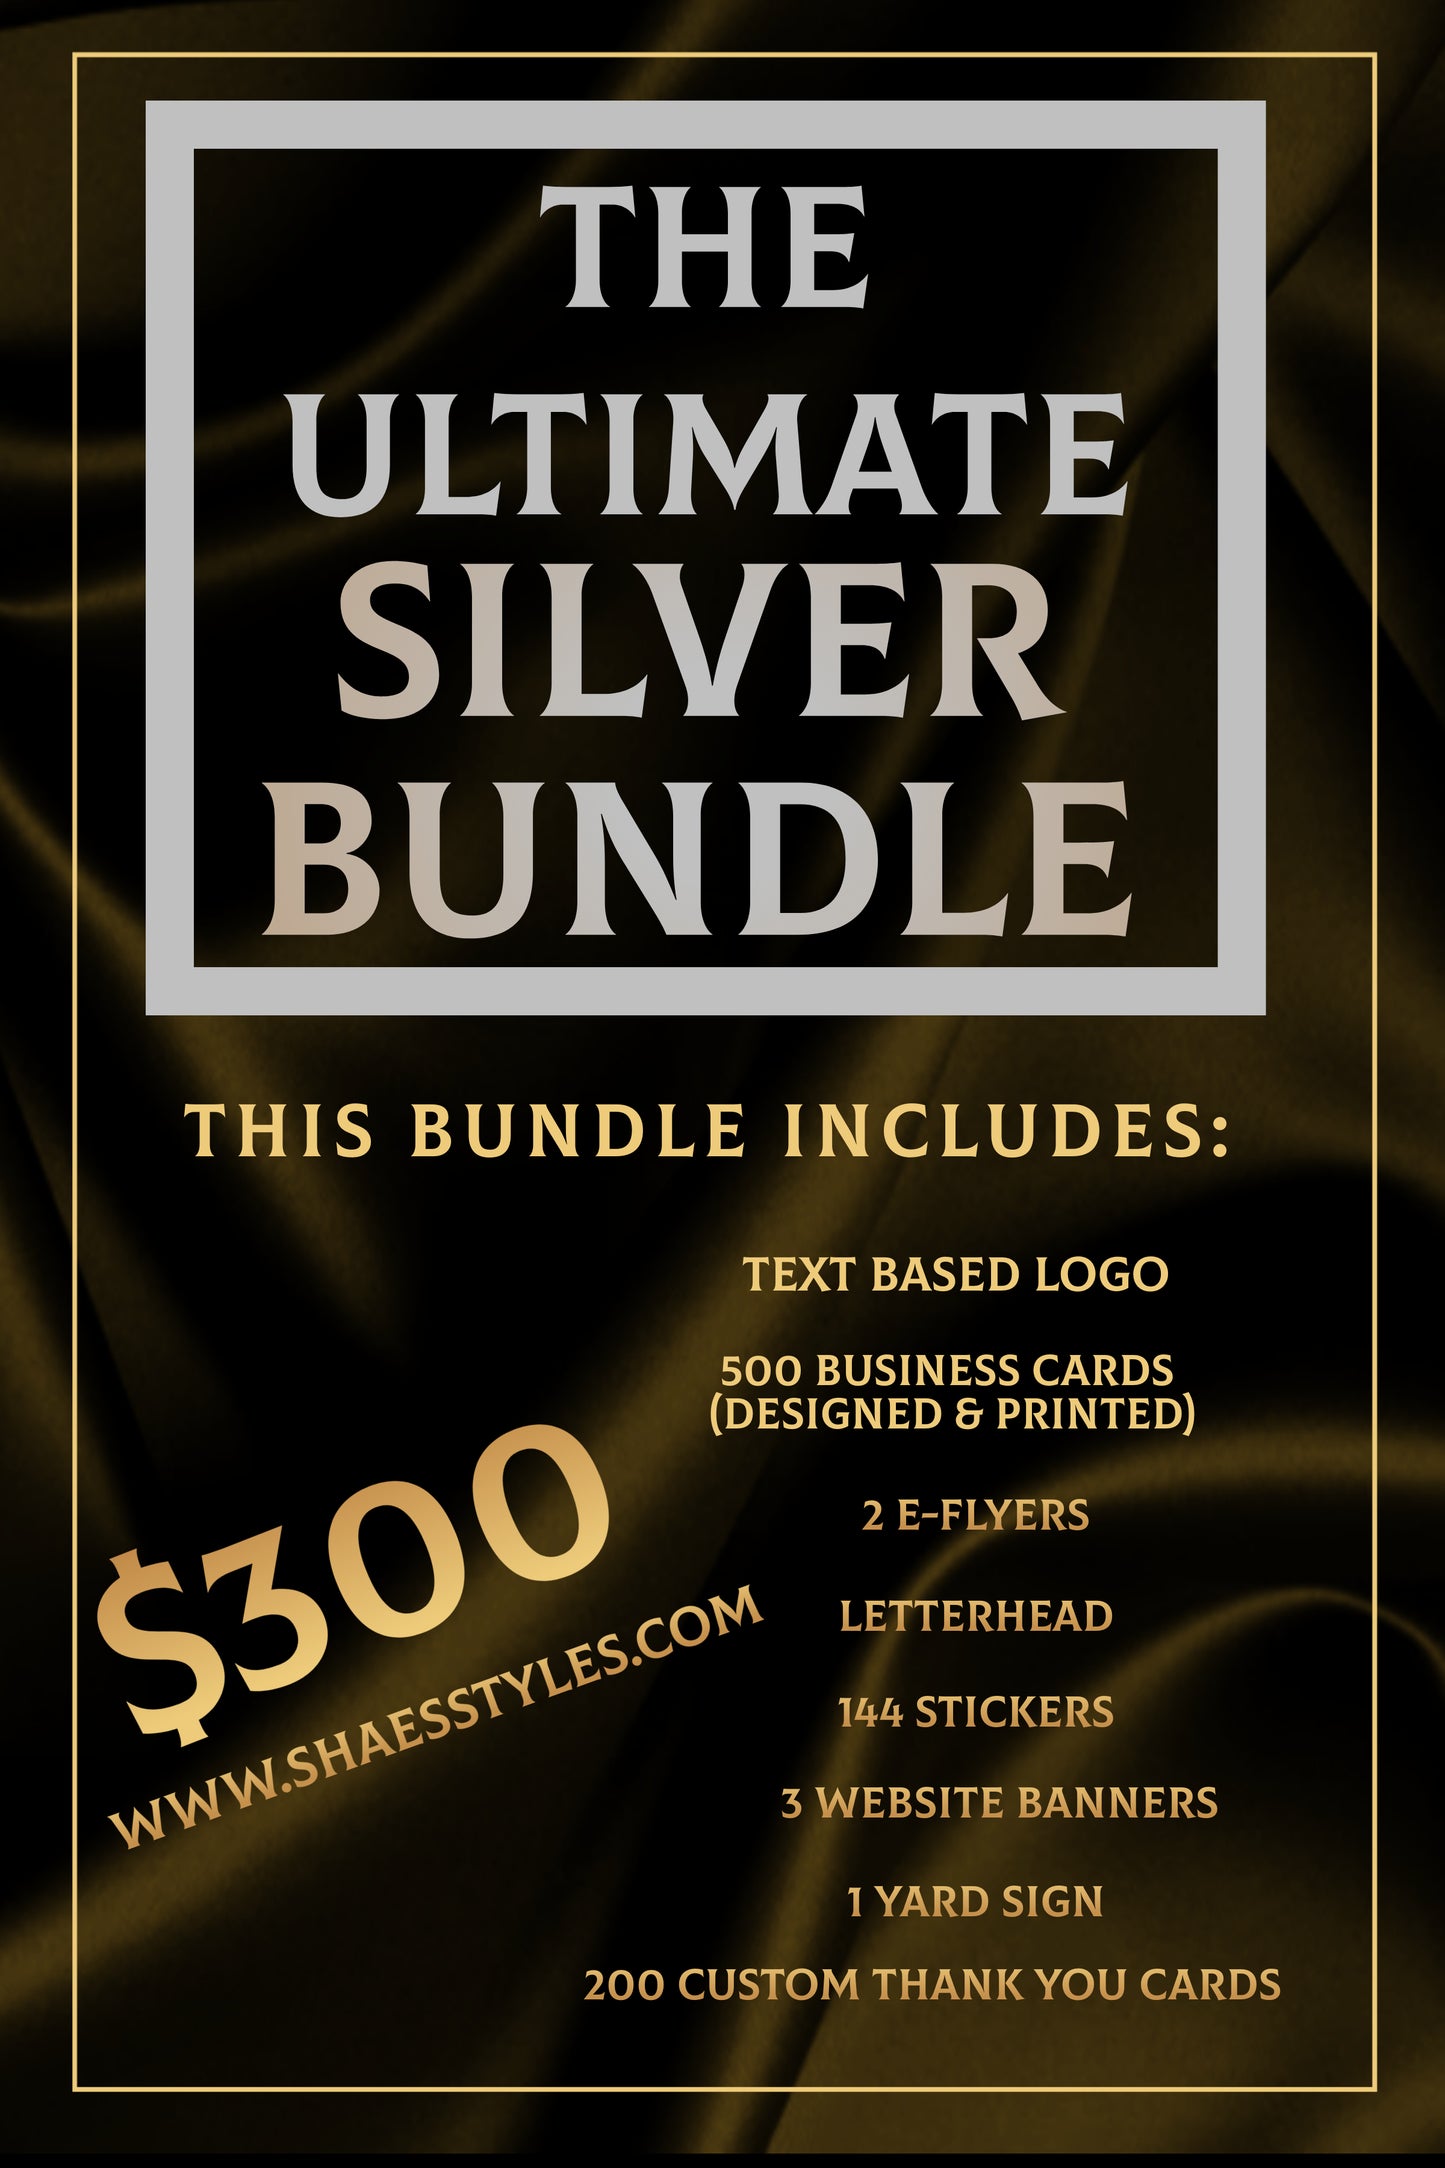 The Ultimate Silver Bundle